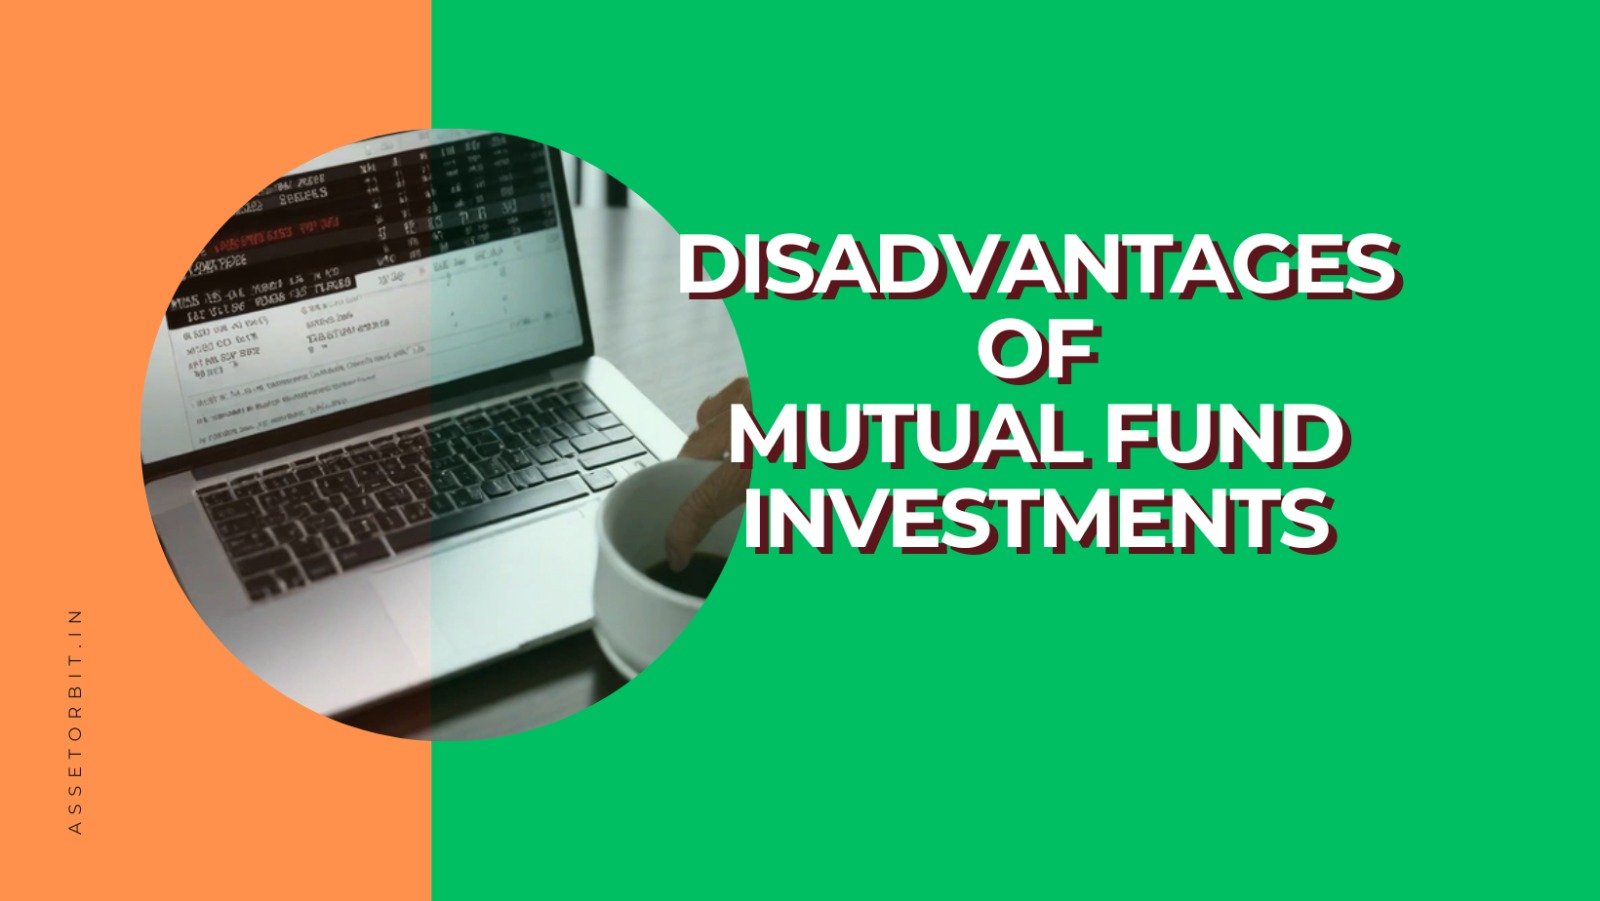 Disadvantages of Mutual Fund Investments